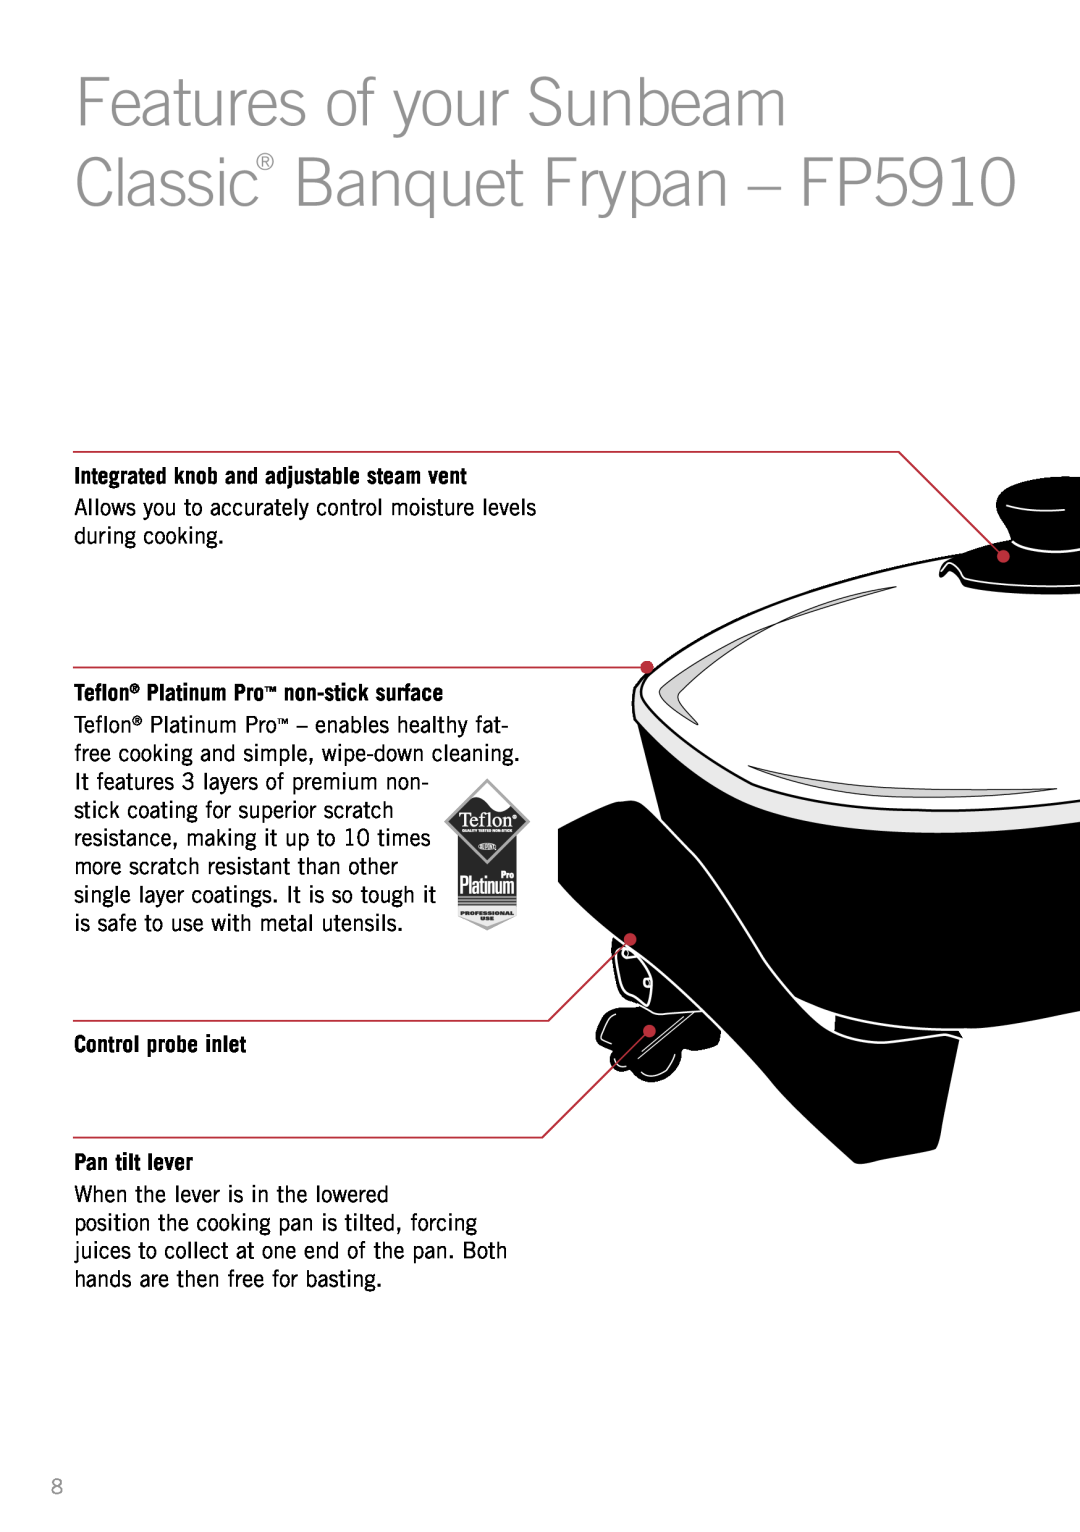 Sunbeam SK4200P manual Features of your Sunbeam, Classic Banquet Frypan – FP5910, Integrated knob and adjustable steam vent 